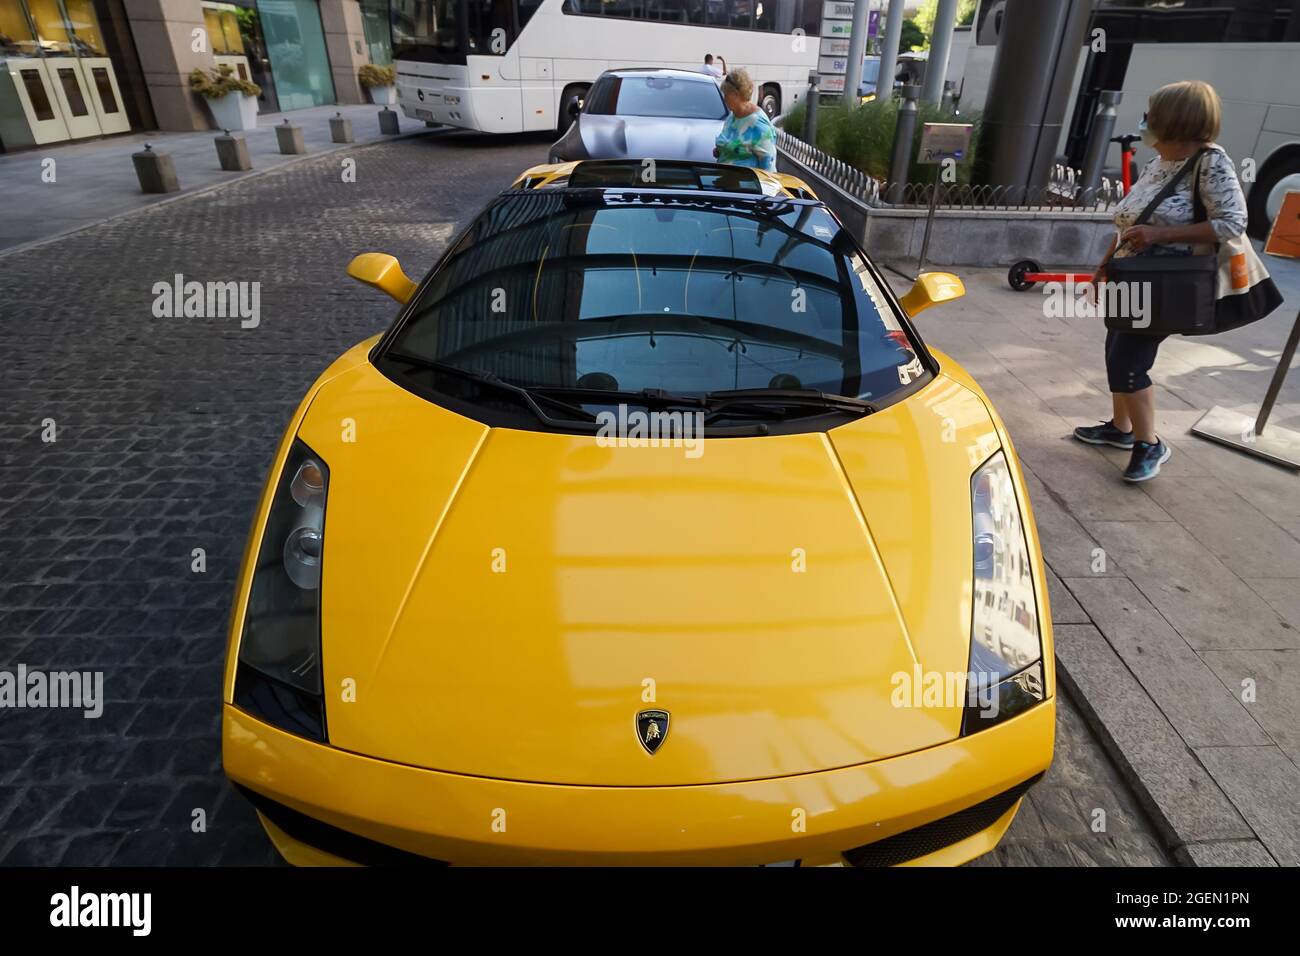 Bucharest, Romania - August 17, 2021: An yellow 2006 Lamborghini Gallardo Spyder is parked in front of the entrance to the Radisson Blu Hotel Buchares Stock Photo